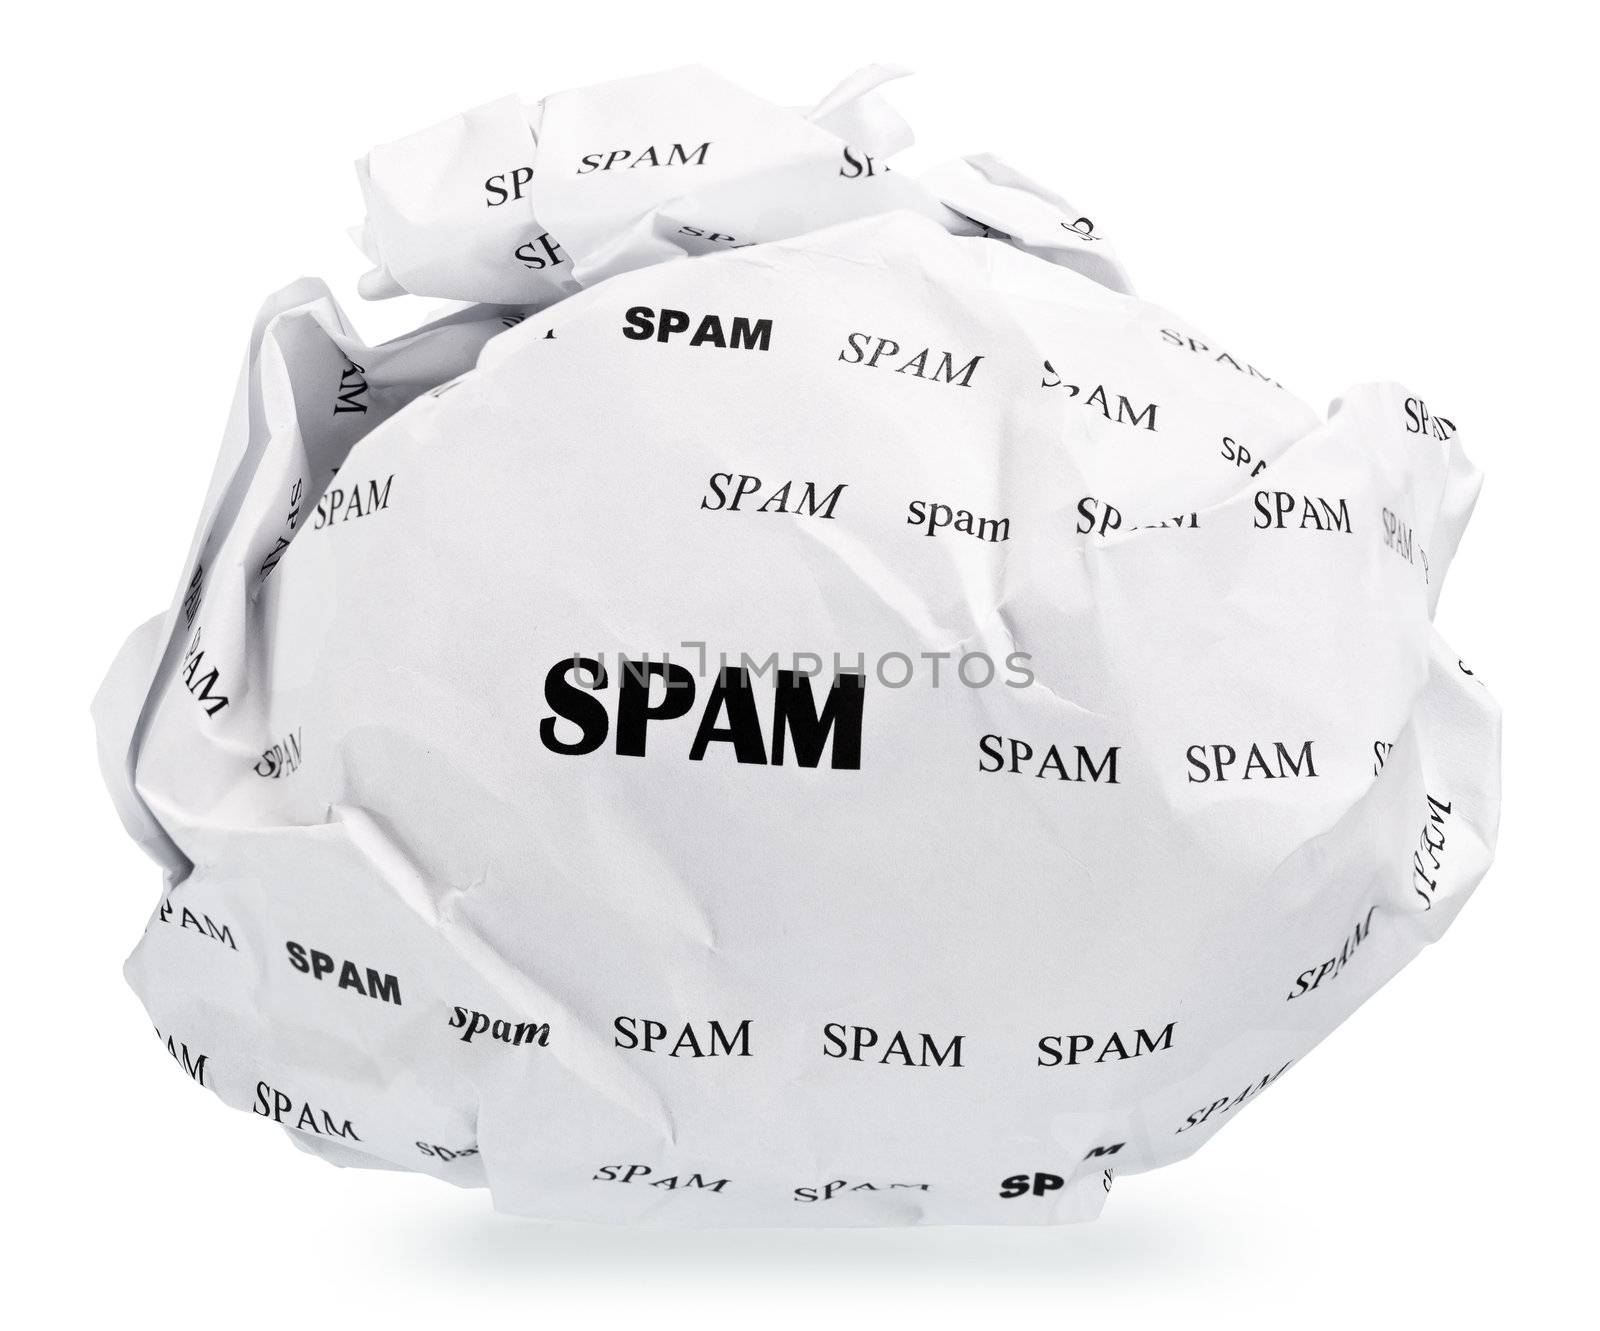 ball of crumpled paper with conceptual text. Isolated with clipping path, expanding the zone of focus achieved by picking out a few photos